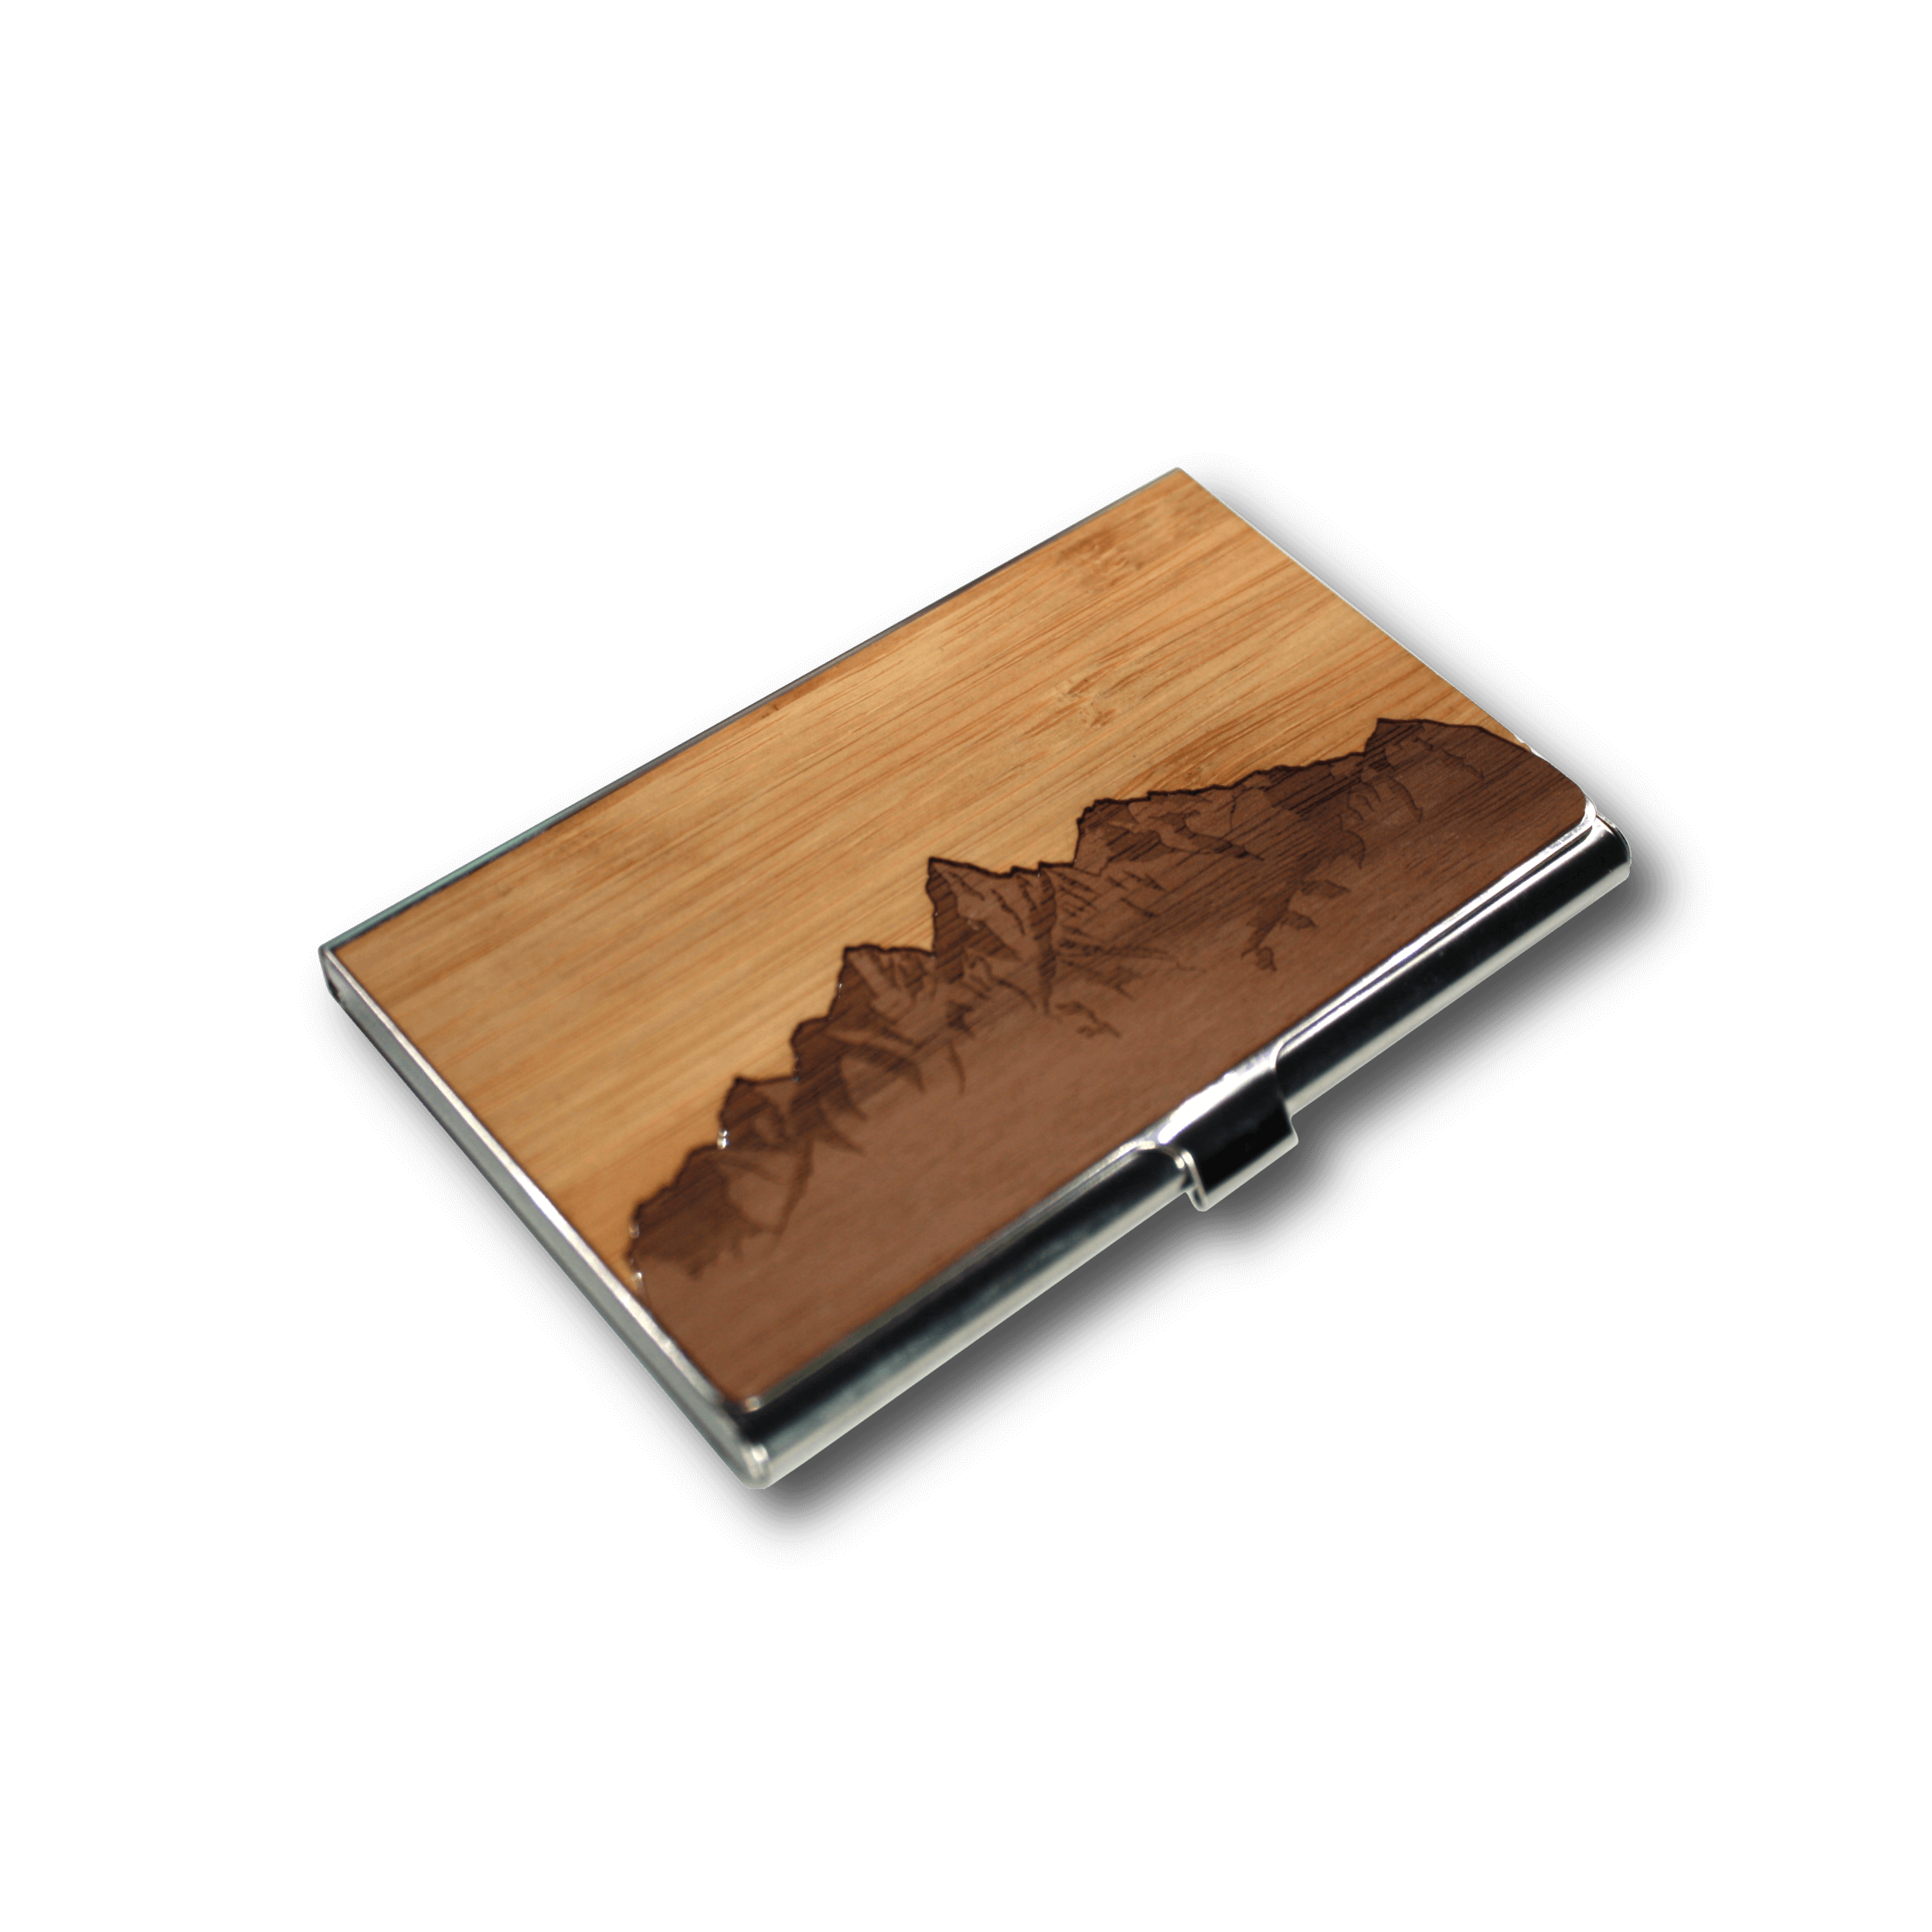 WUDN Wooden Business Card Holder Wallet, Holds 20 Cards, Built with Stainless Steel and Real Wood - Sawtooth Mountains Bamboo